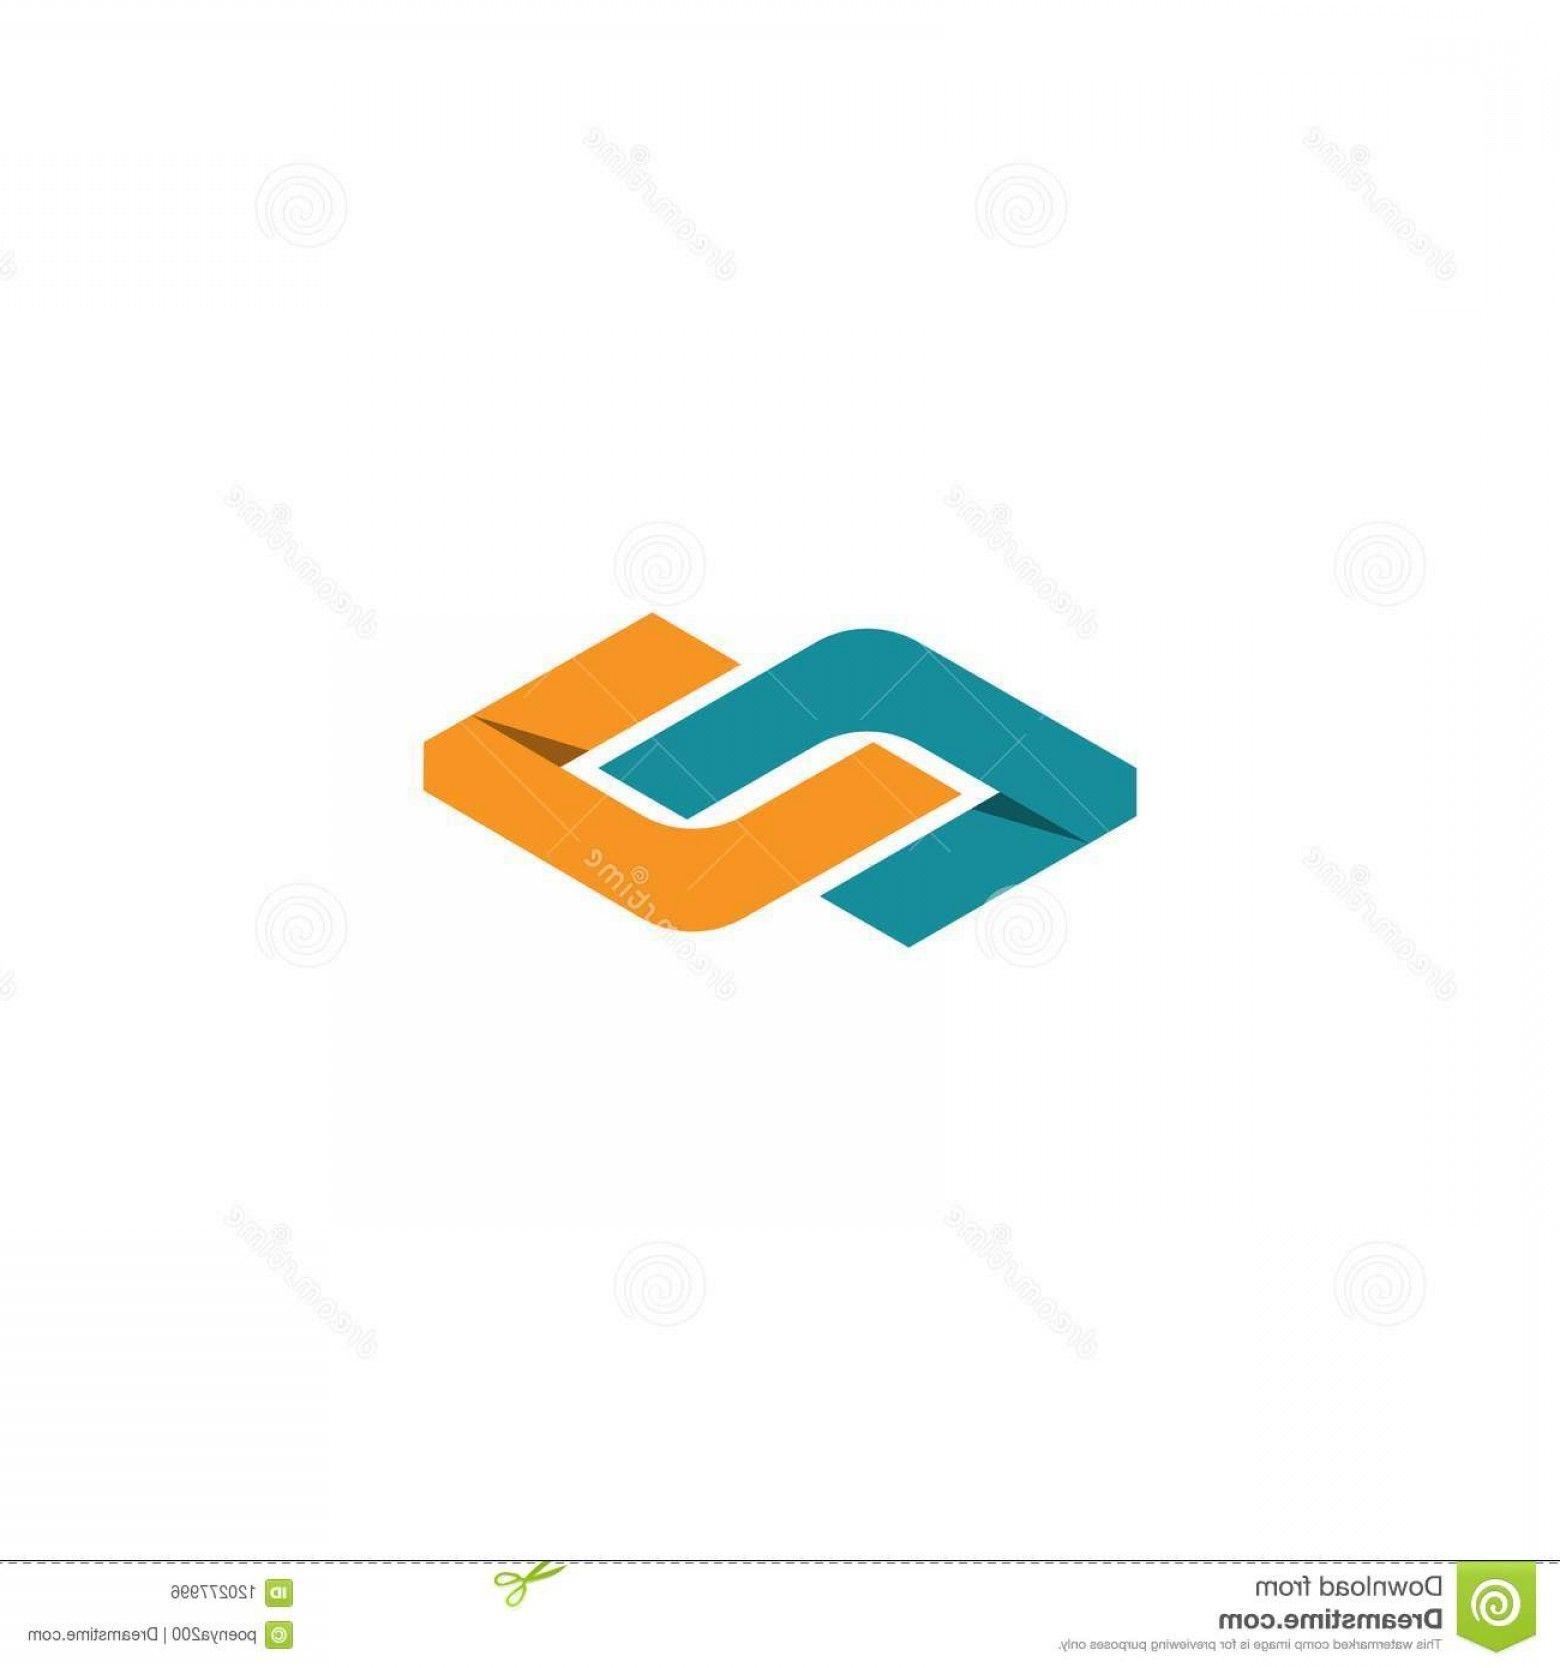 Use Gradient of Colors in Logo - Abstract Infinity Letter Nu Chain Cube Logo Element Concept Gradient